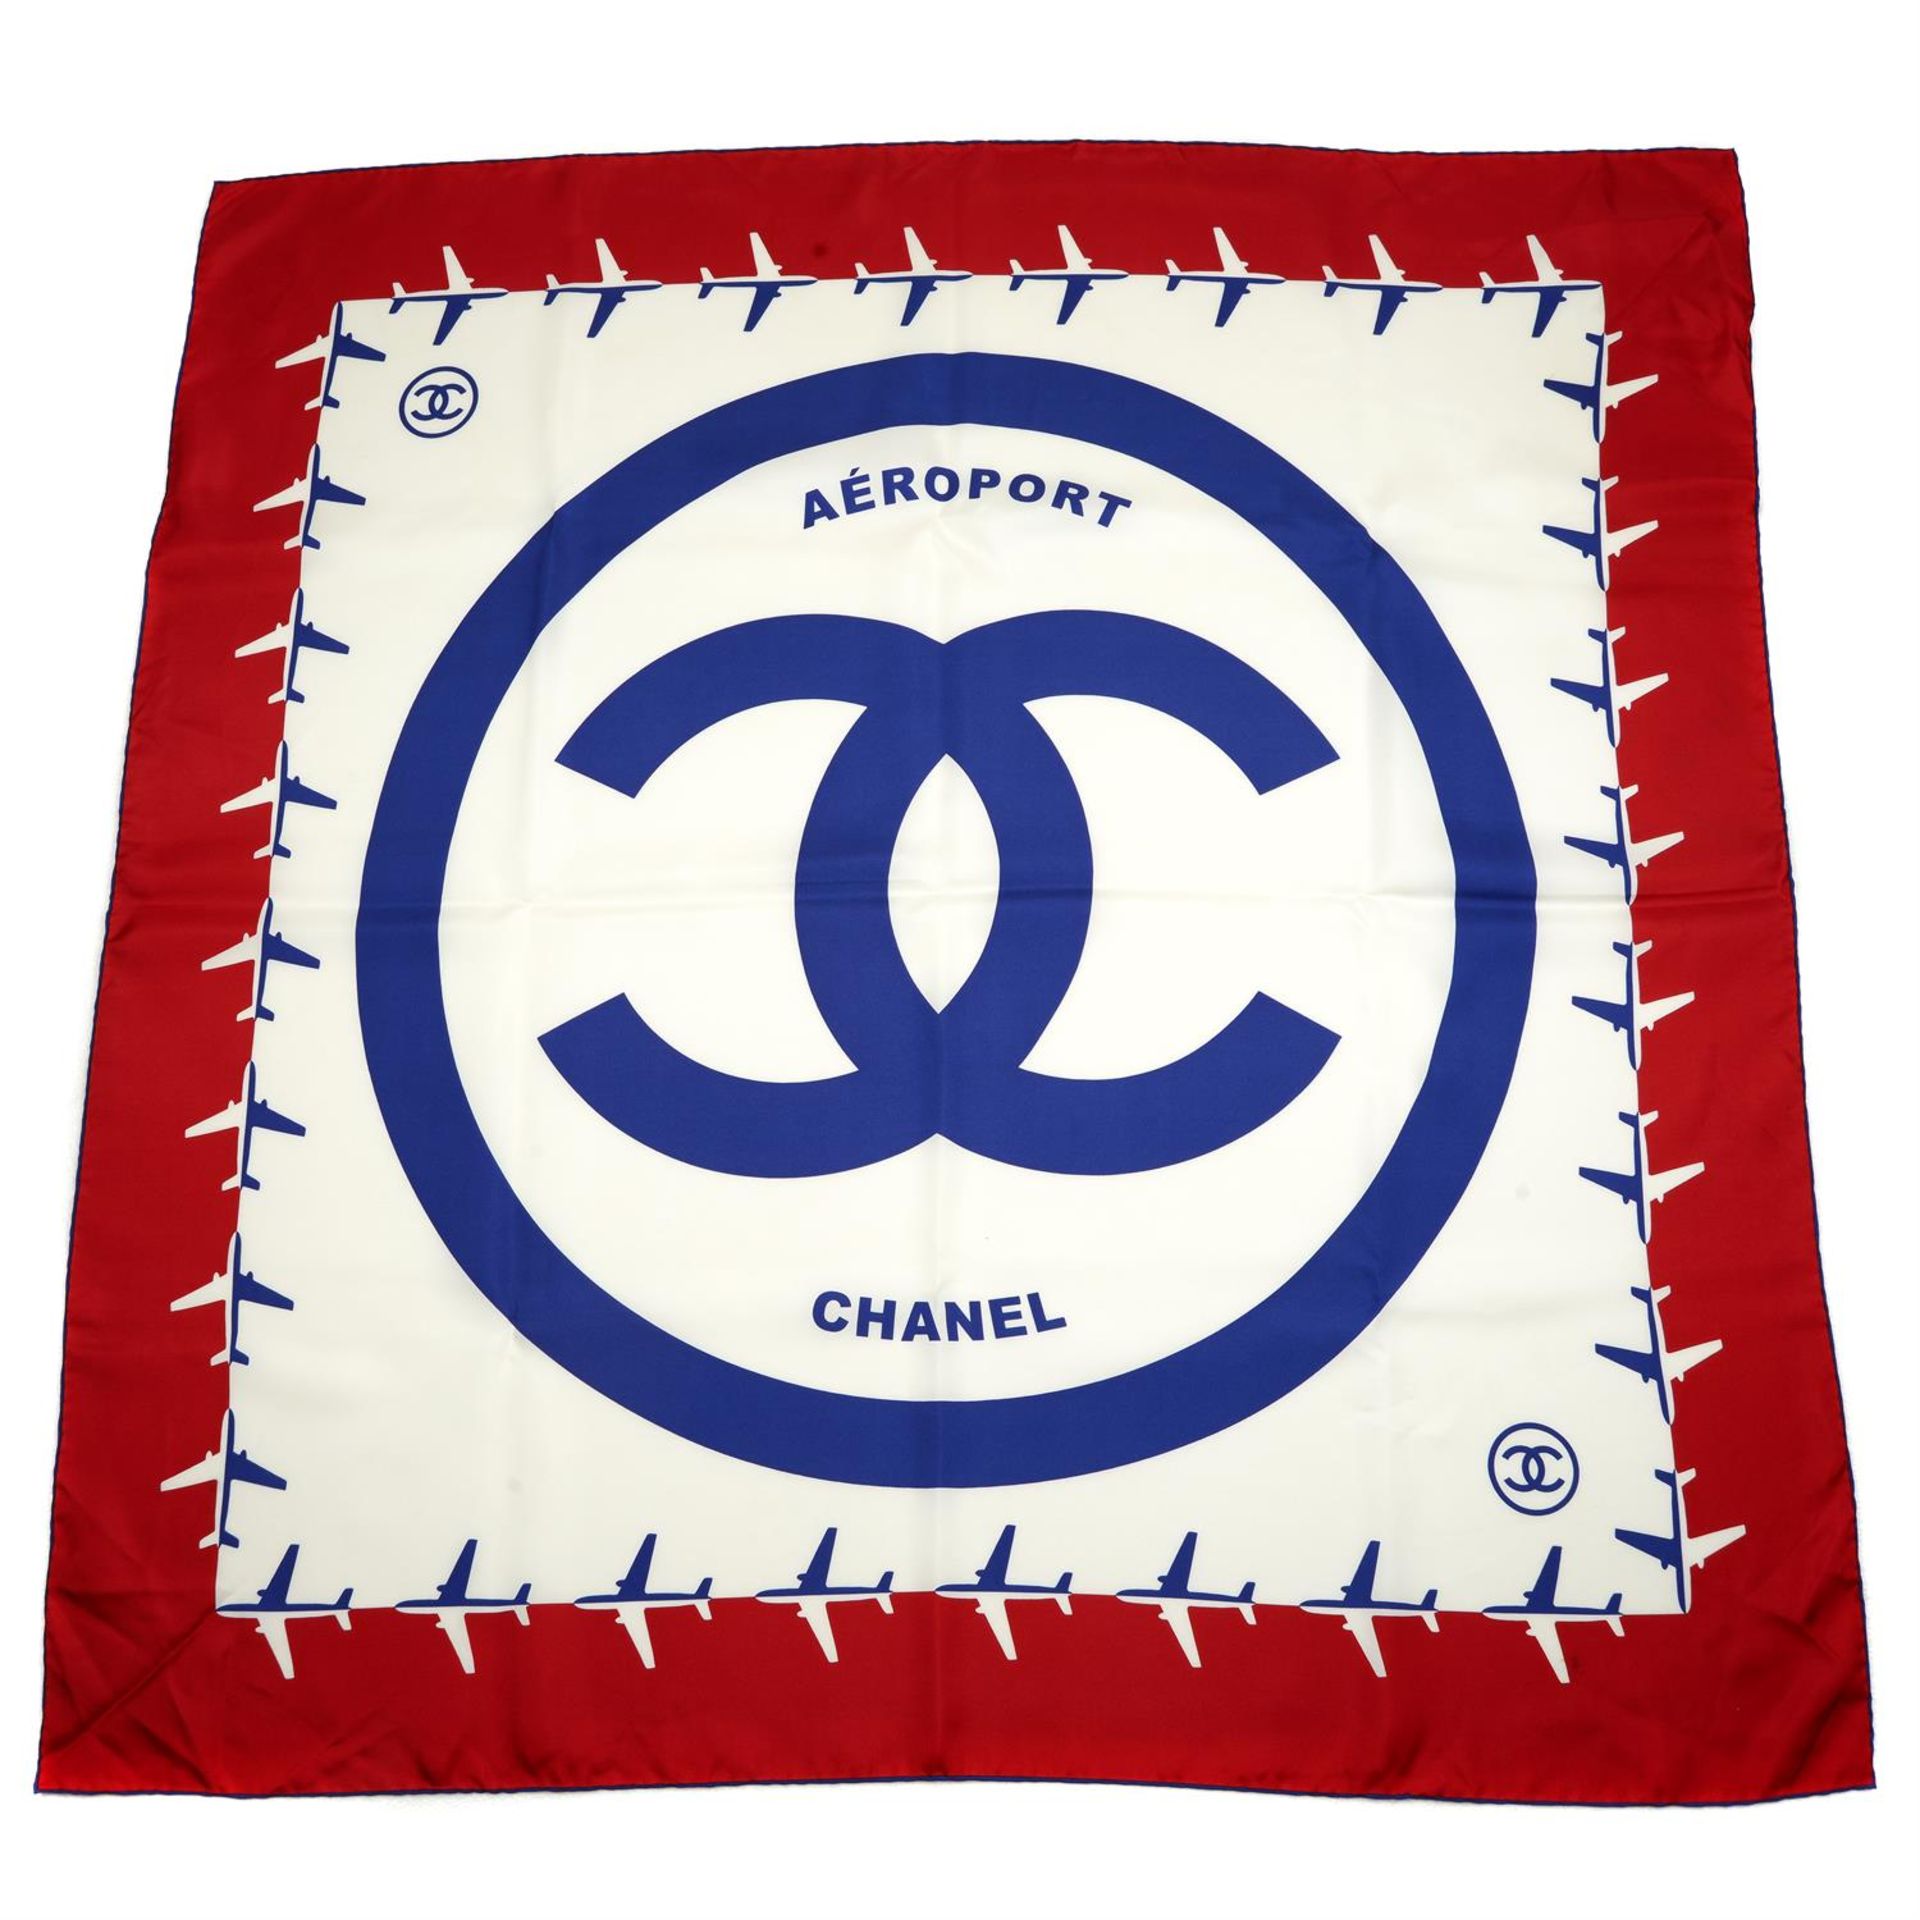 CHANEL - a Chanel Airlines silk scarf.